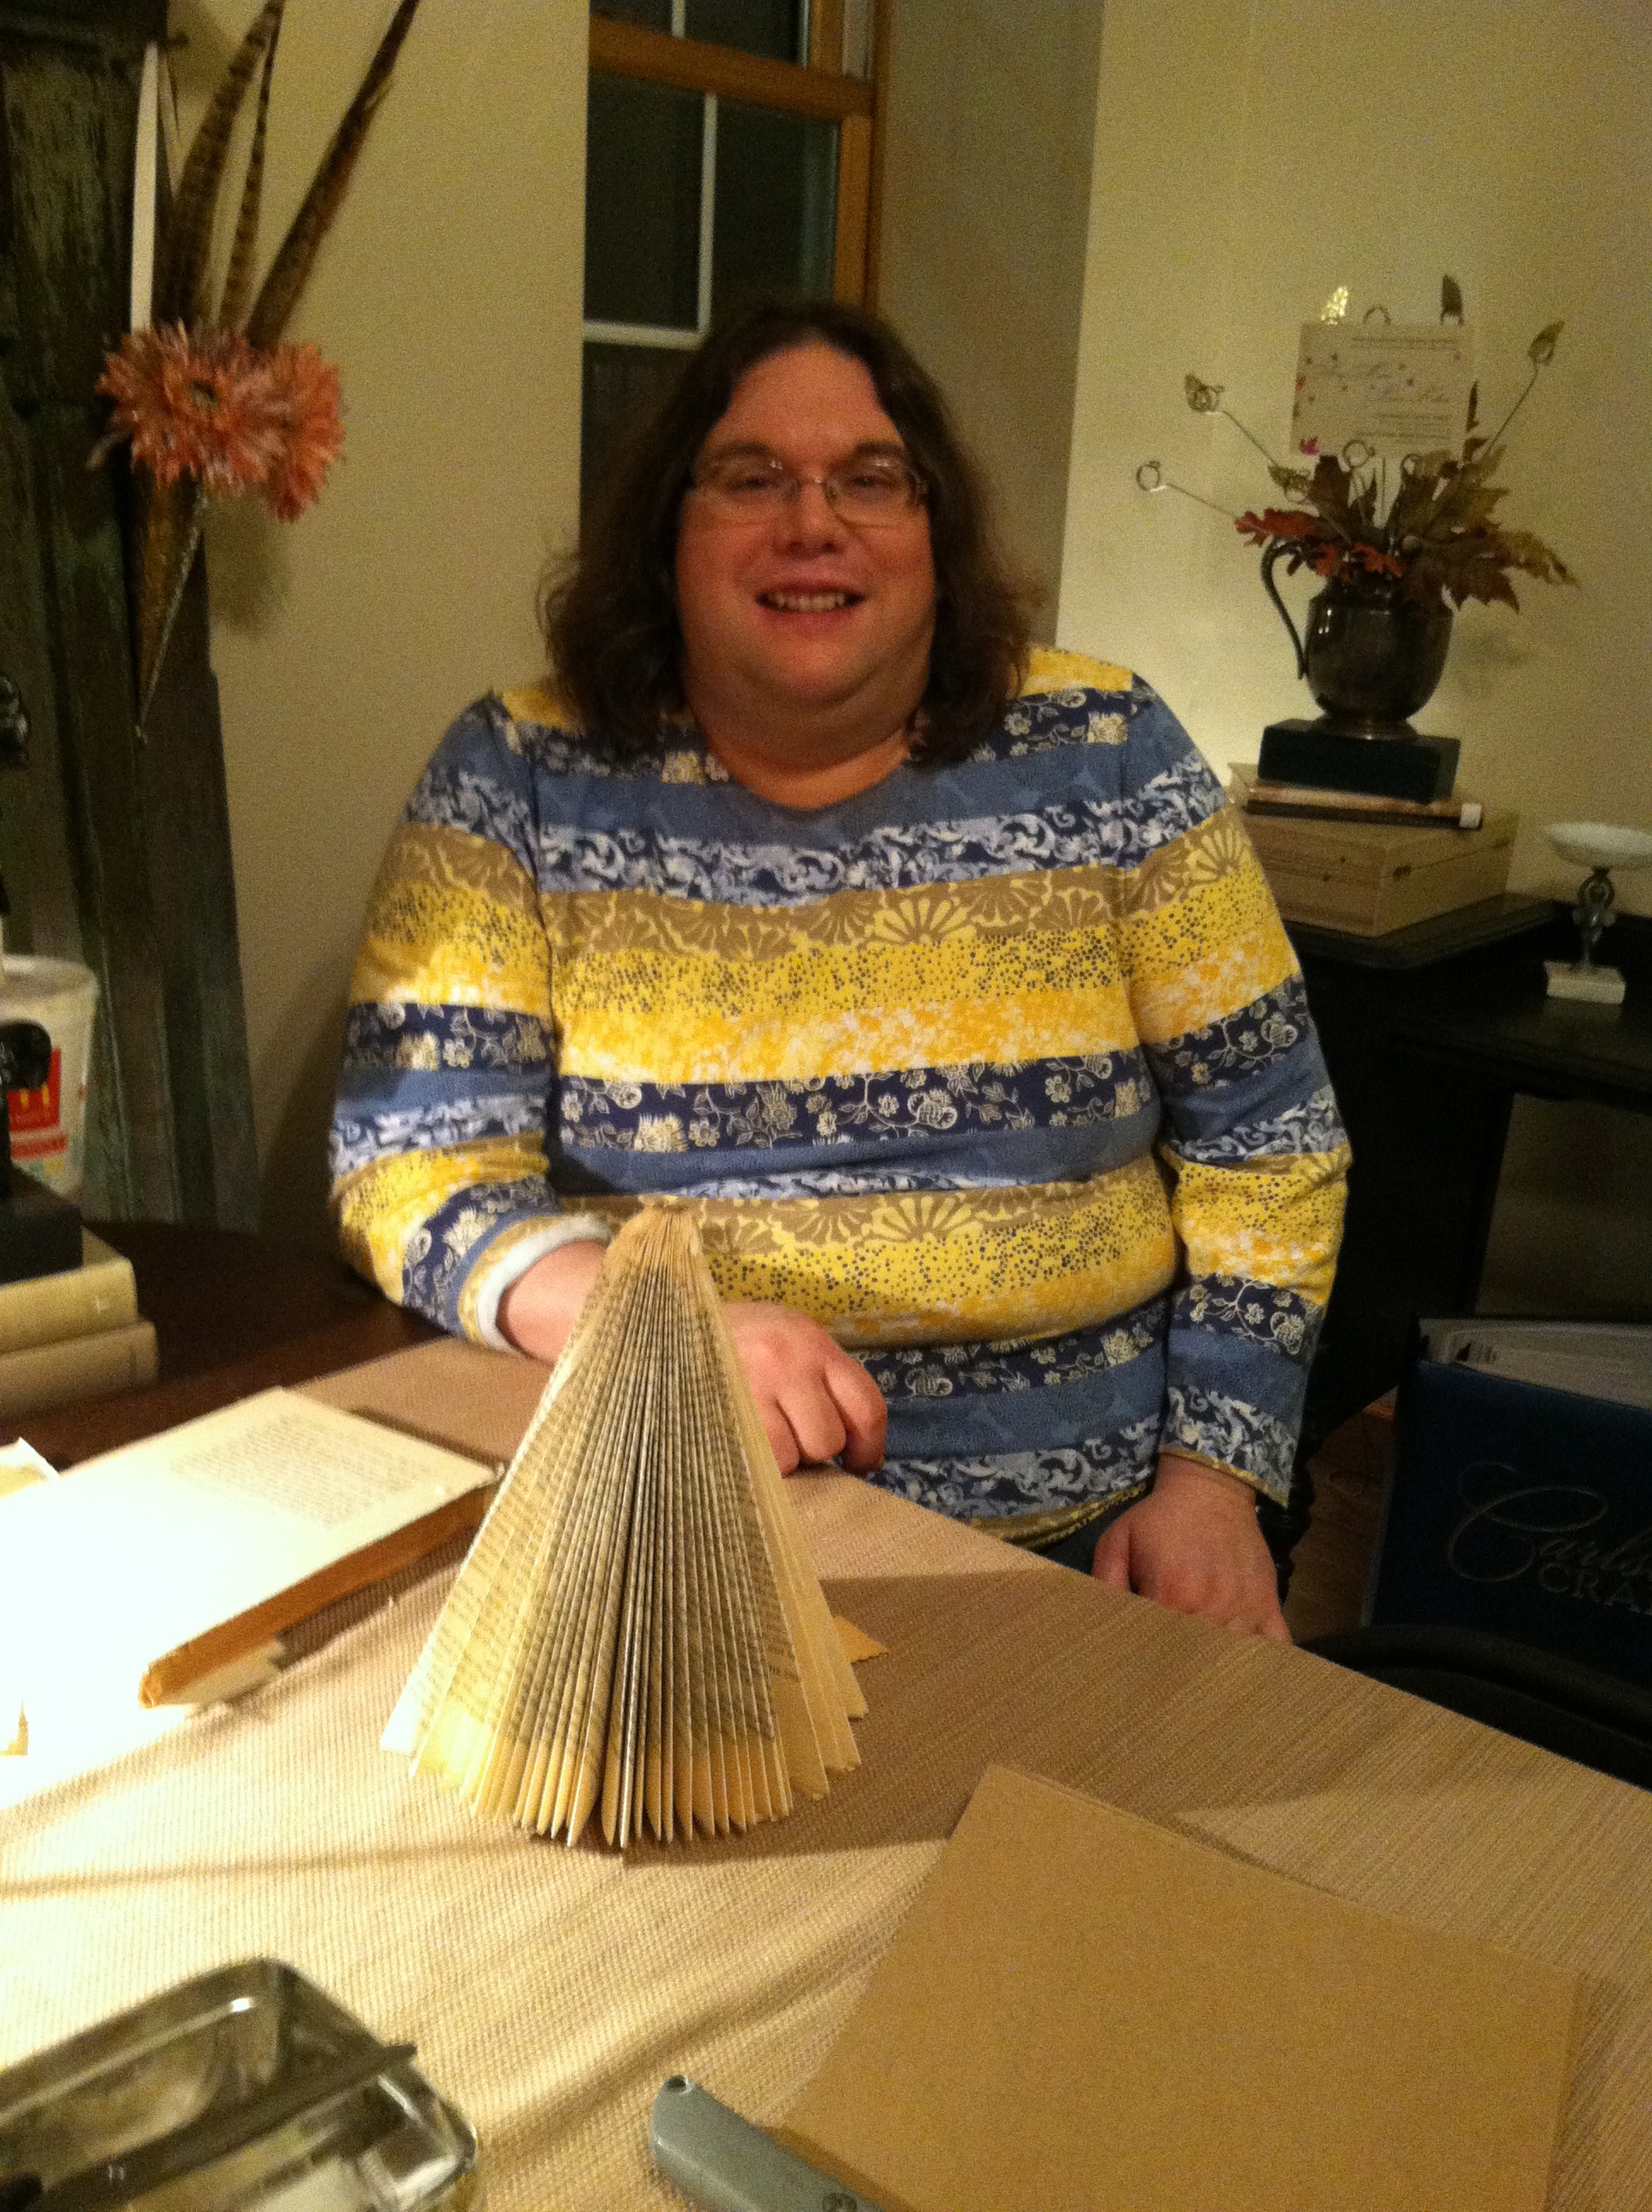  One of my bestest friends, Kathy. &nbsp;Kathy has become more crafty as the years pass. &nbsp;Proud of her paper tree. 